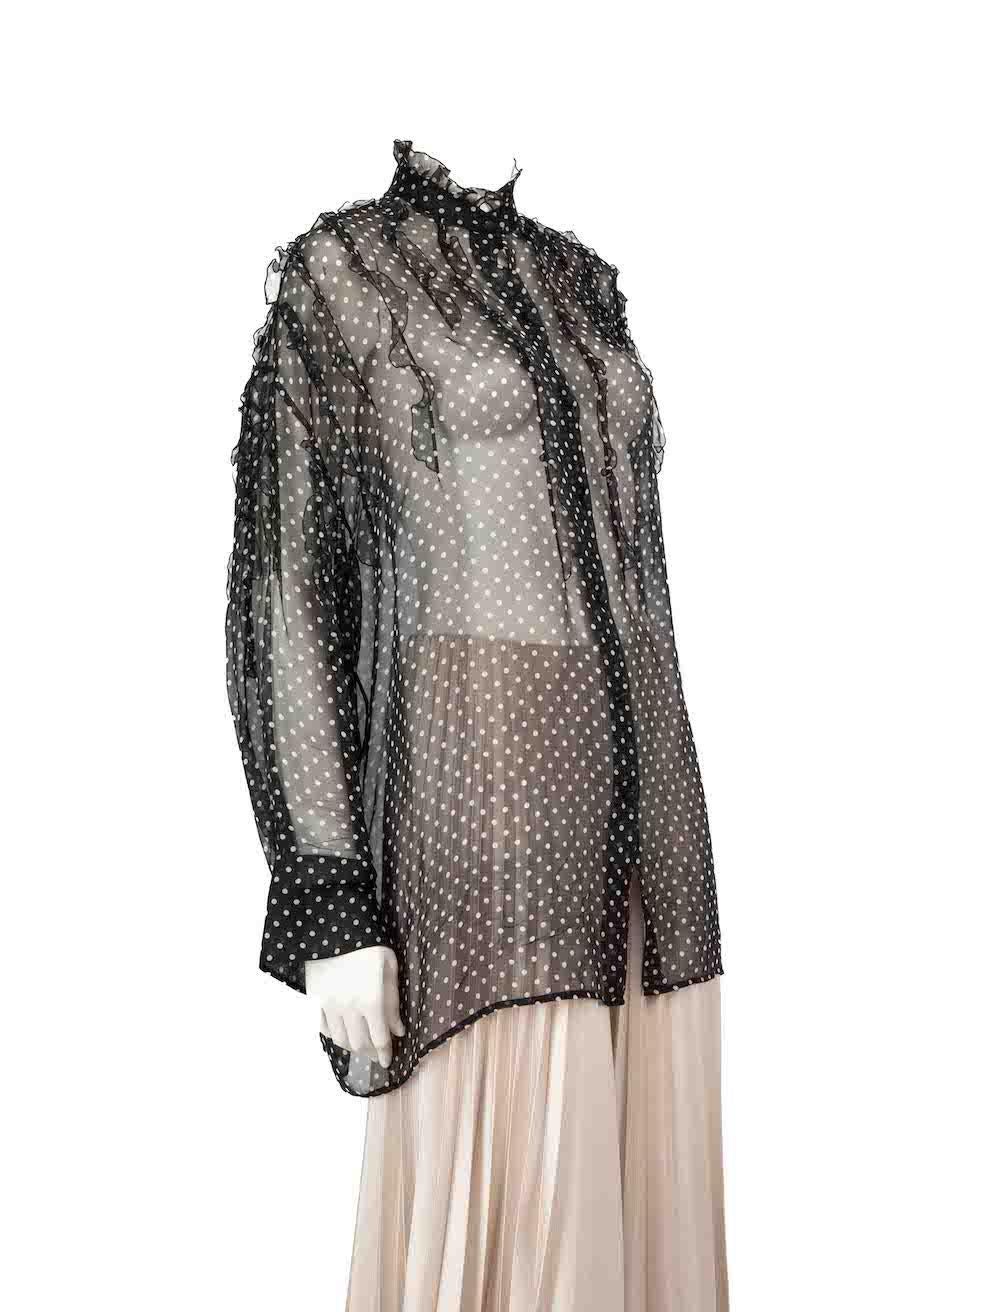 CONDITION is Very good. Minimal wear to blouseis evident. Minimal wear to the collar where a button is missing on this used Valentino Garavani designer resale item.
 
 
 
 Details
 
 
 Black
 
 Silk
 
 Blouse
 
 Polkadot pattern
 
 Sheer
 
 Long